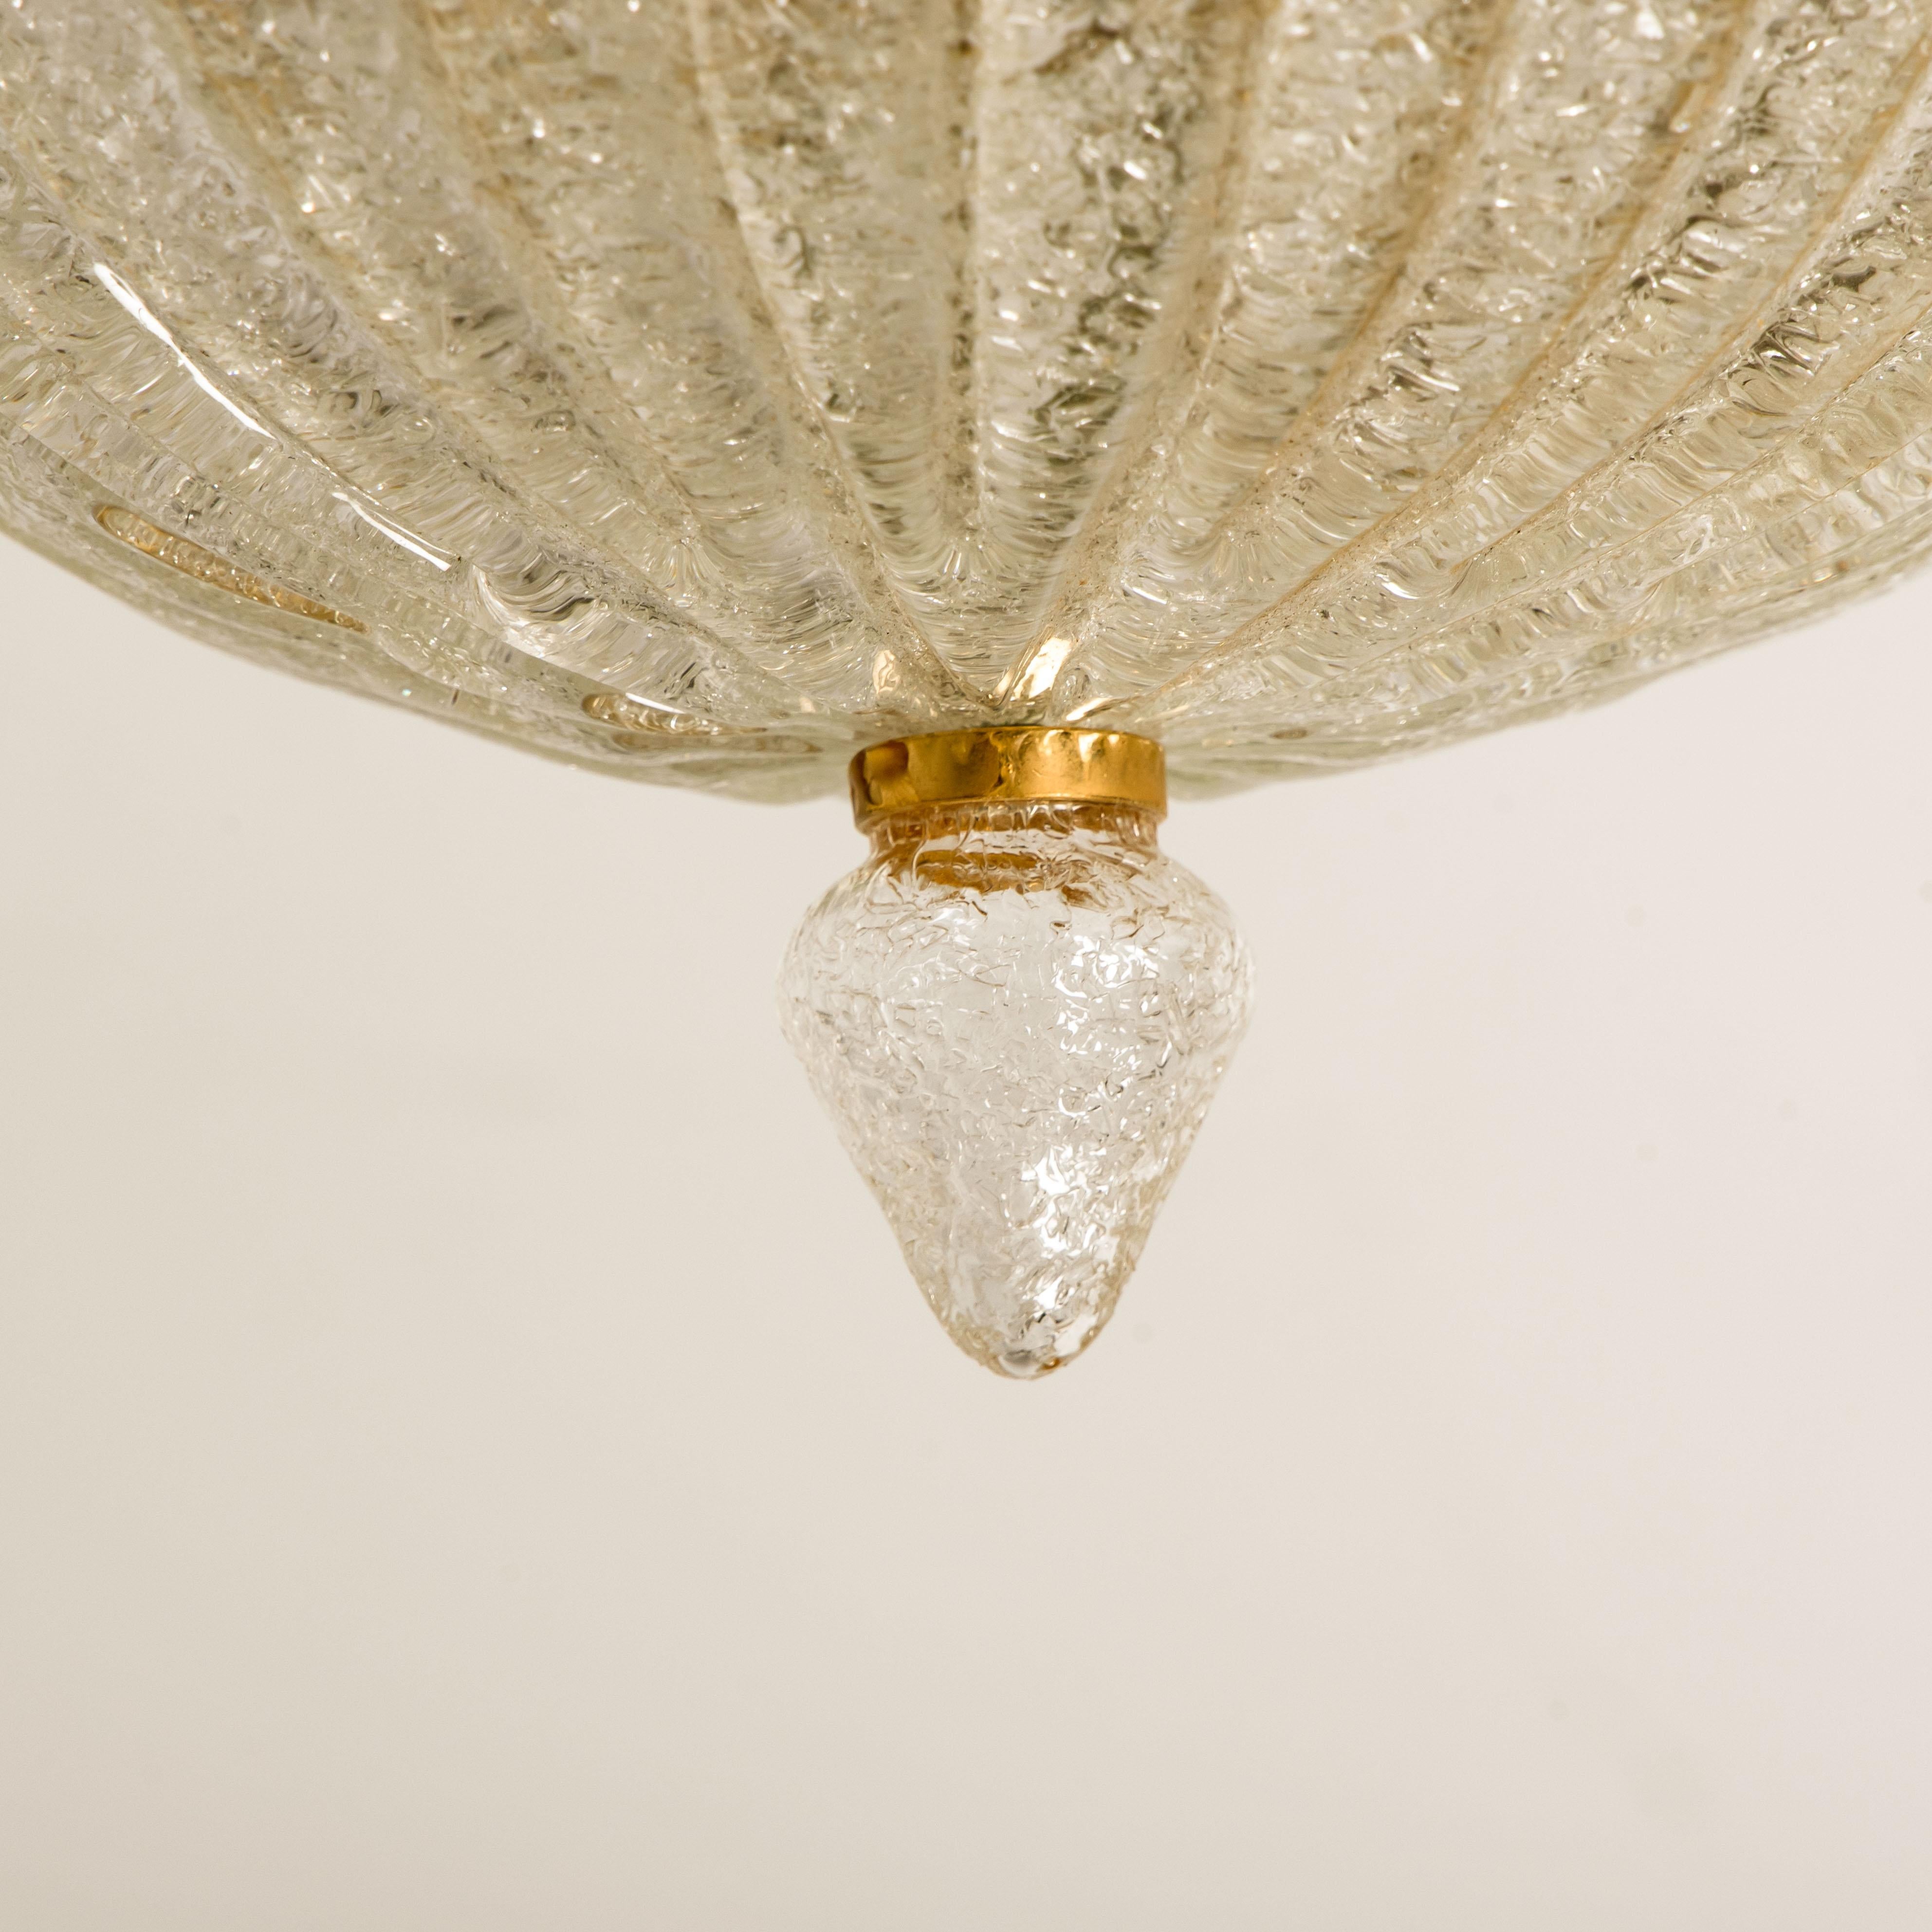 An elegant hand blown Murano glass flushmount of Barovier & Toso. The light fixture consists 16 blown Murano glass leaves. Mounted on a brass frame. The leaves refract light beautifully. The flush mount fills the room with a soft, warm and welcoming